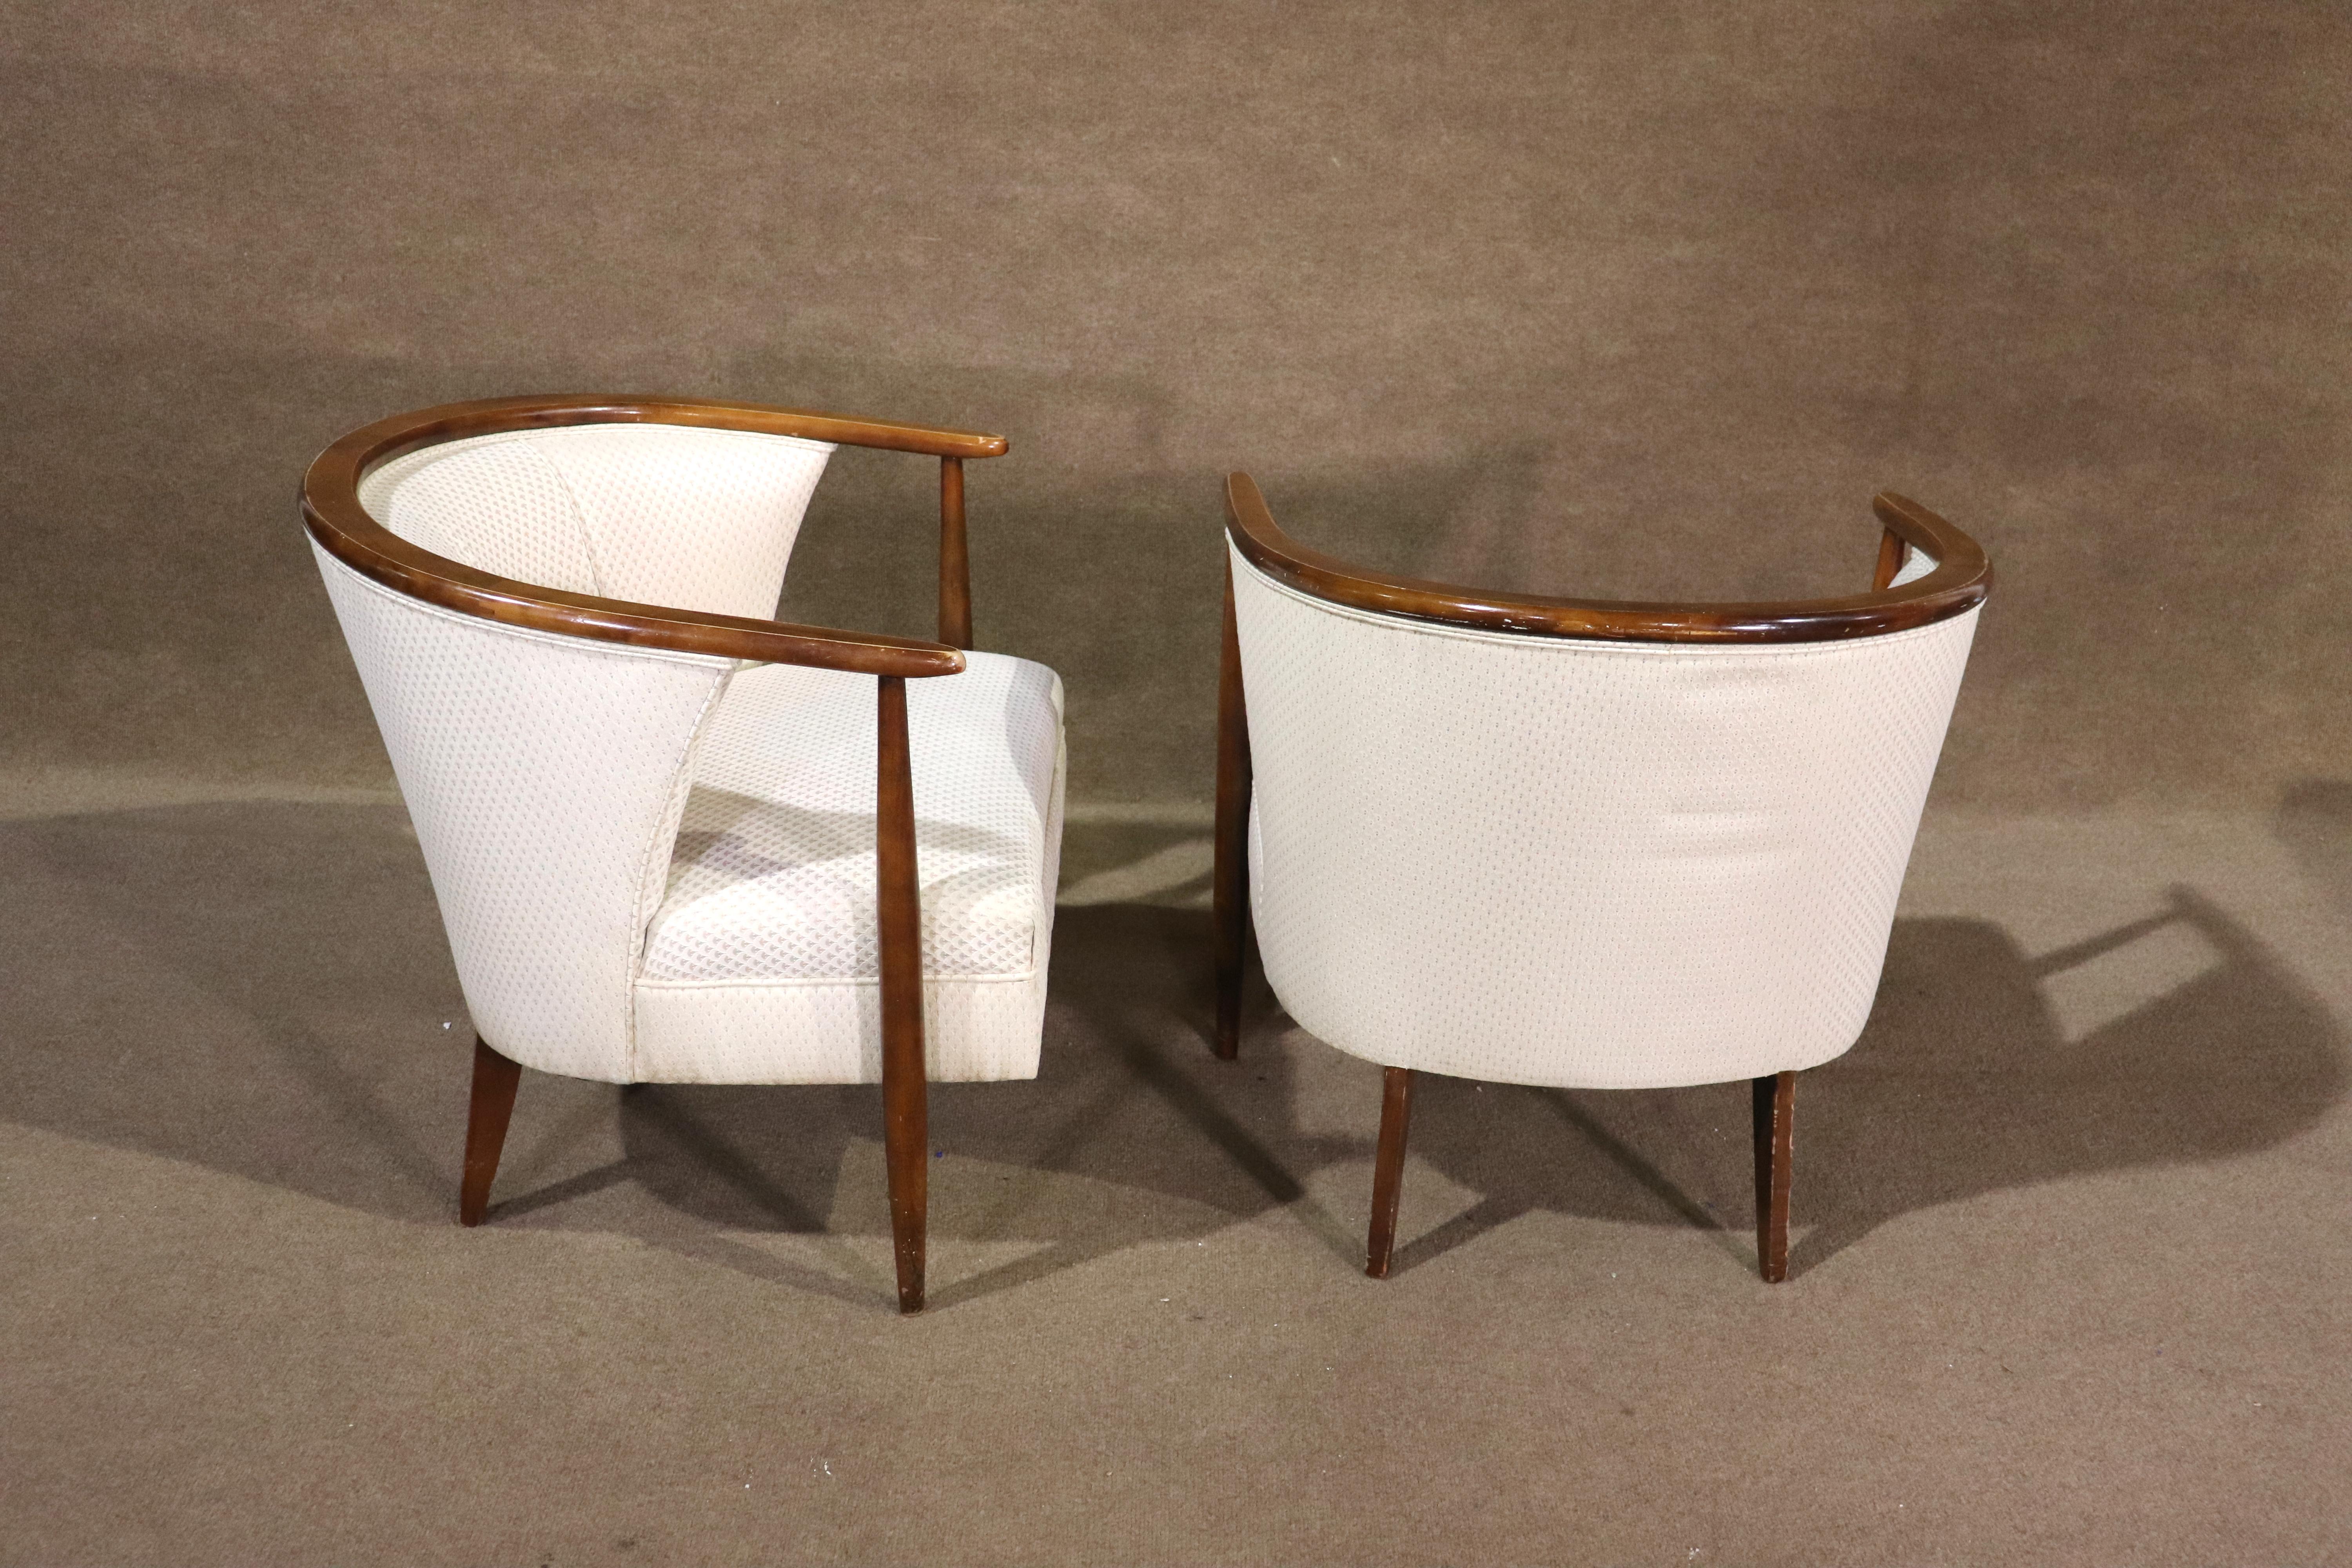 Pair of rounded back lounge chairs with wood trimmed backs. Great Mid-Century Modern design with comfort for home or office.
Please confirm location NY or NJ.